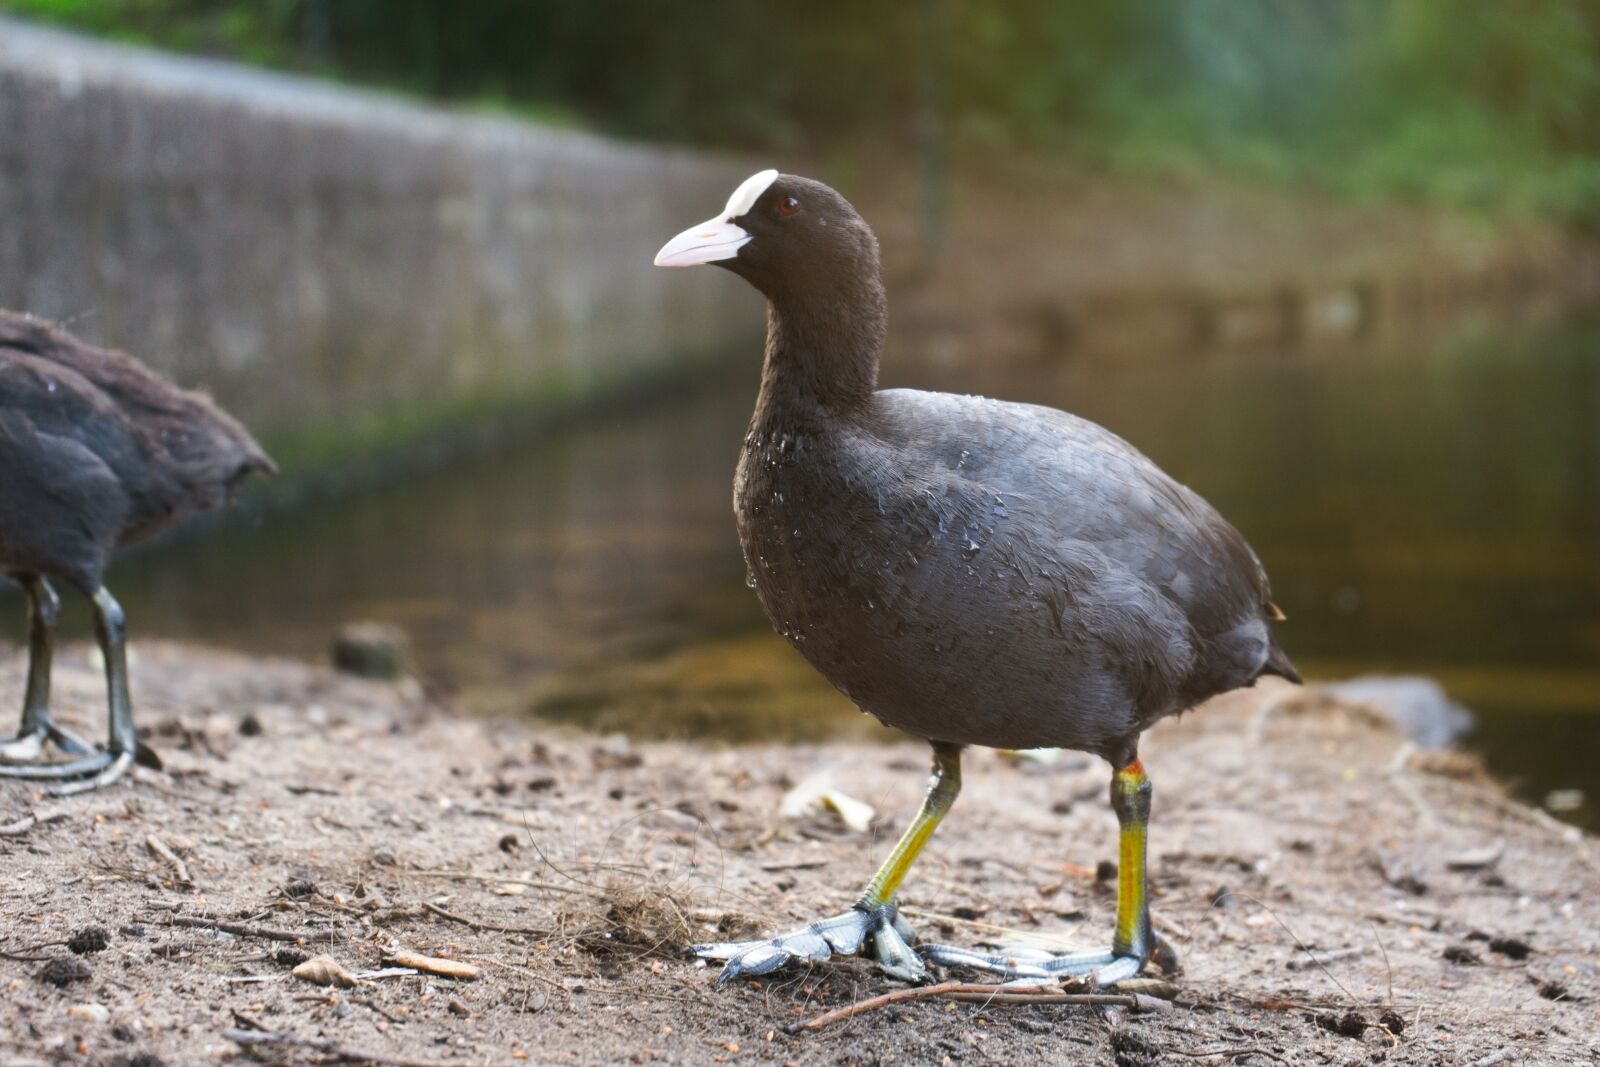 Sony a7 sample photo. Coot, water, concrete photography